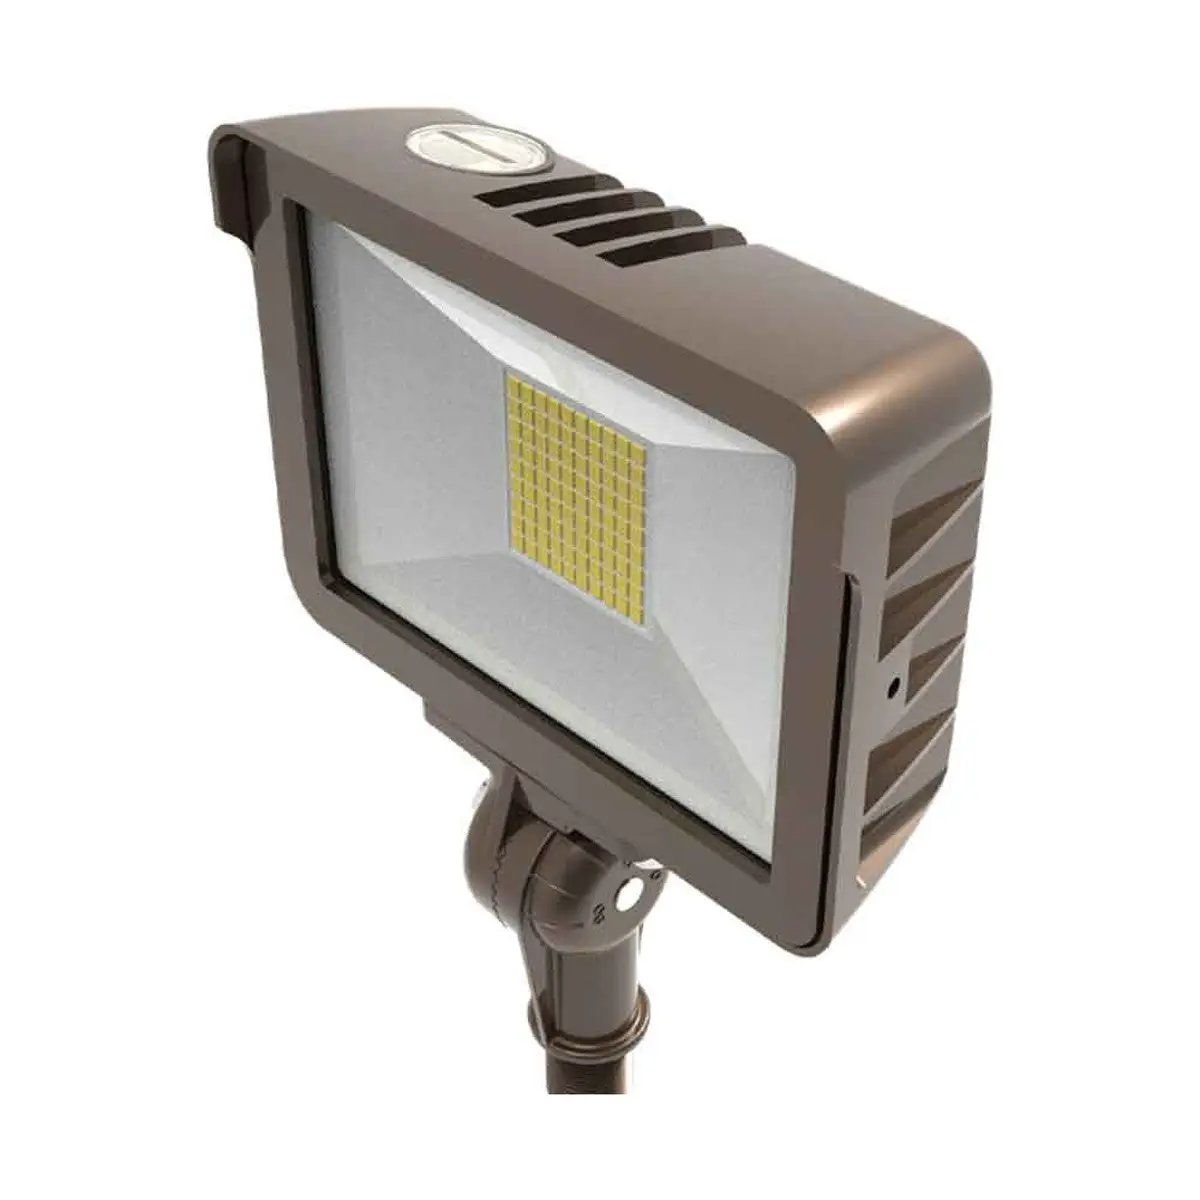 Outdoor Flood Lighting Fixture - A close-up of a light with adjustable color temperature and universal mounting options. Provides 2175 lumens of bright LED light. Energy-saving dusk-to-dawn photocell included. UL Listed, IP65 Rated, and DLC Premium Listed.